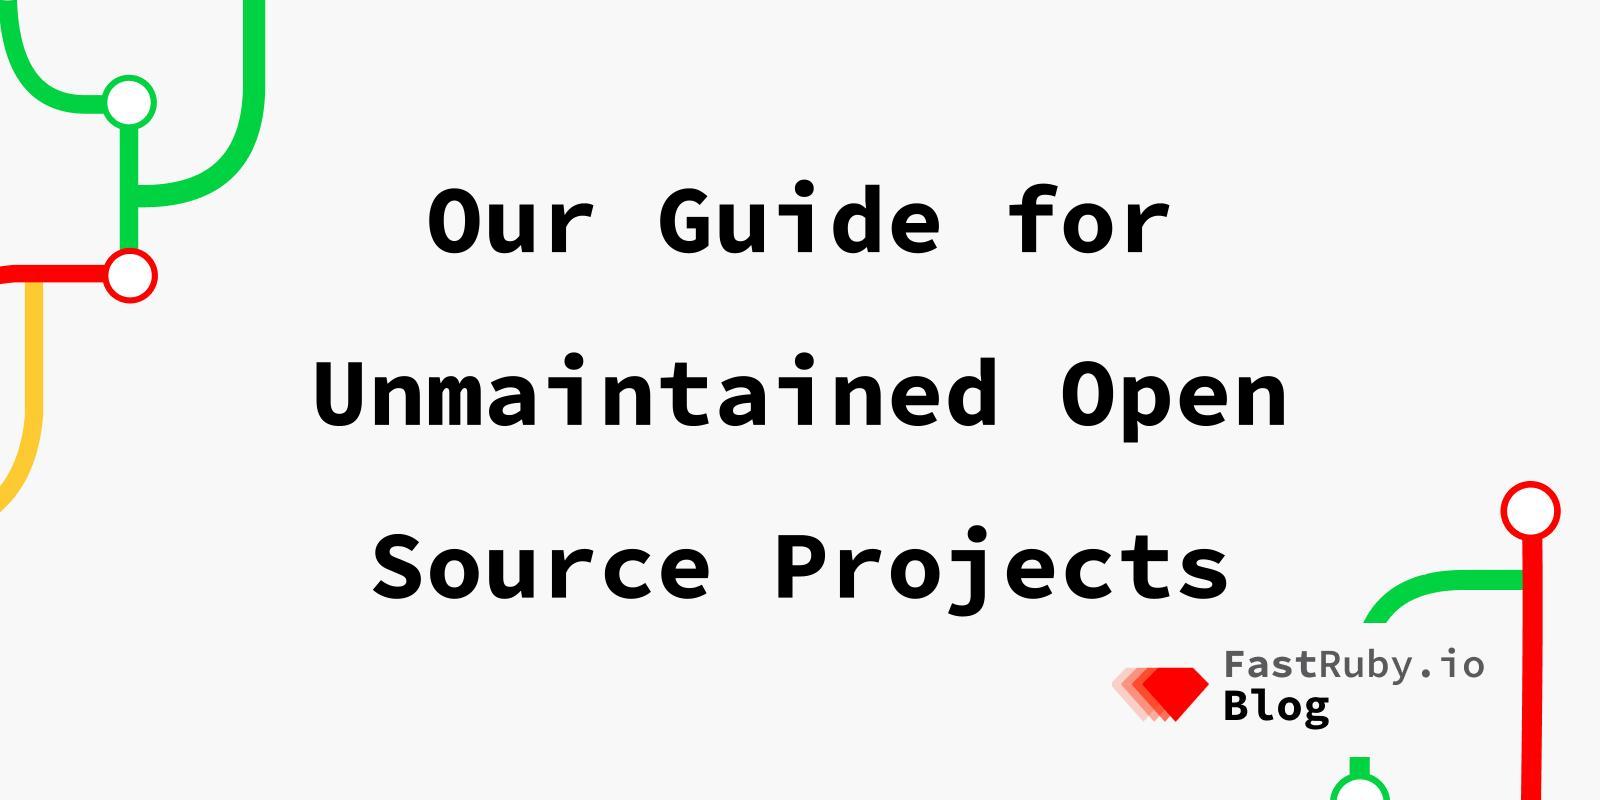 Our Guide for Unmaintained Open Source Projects